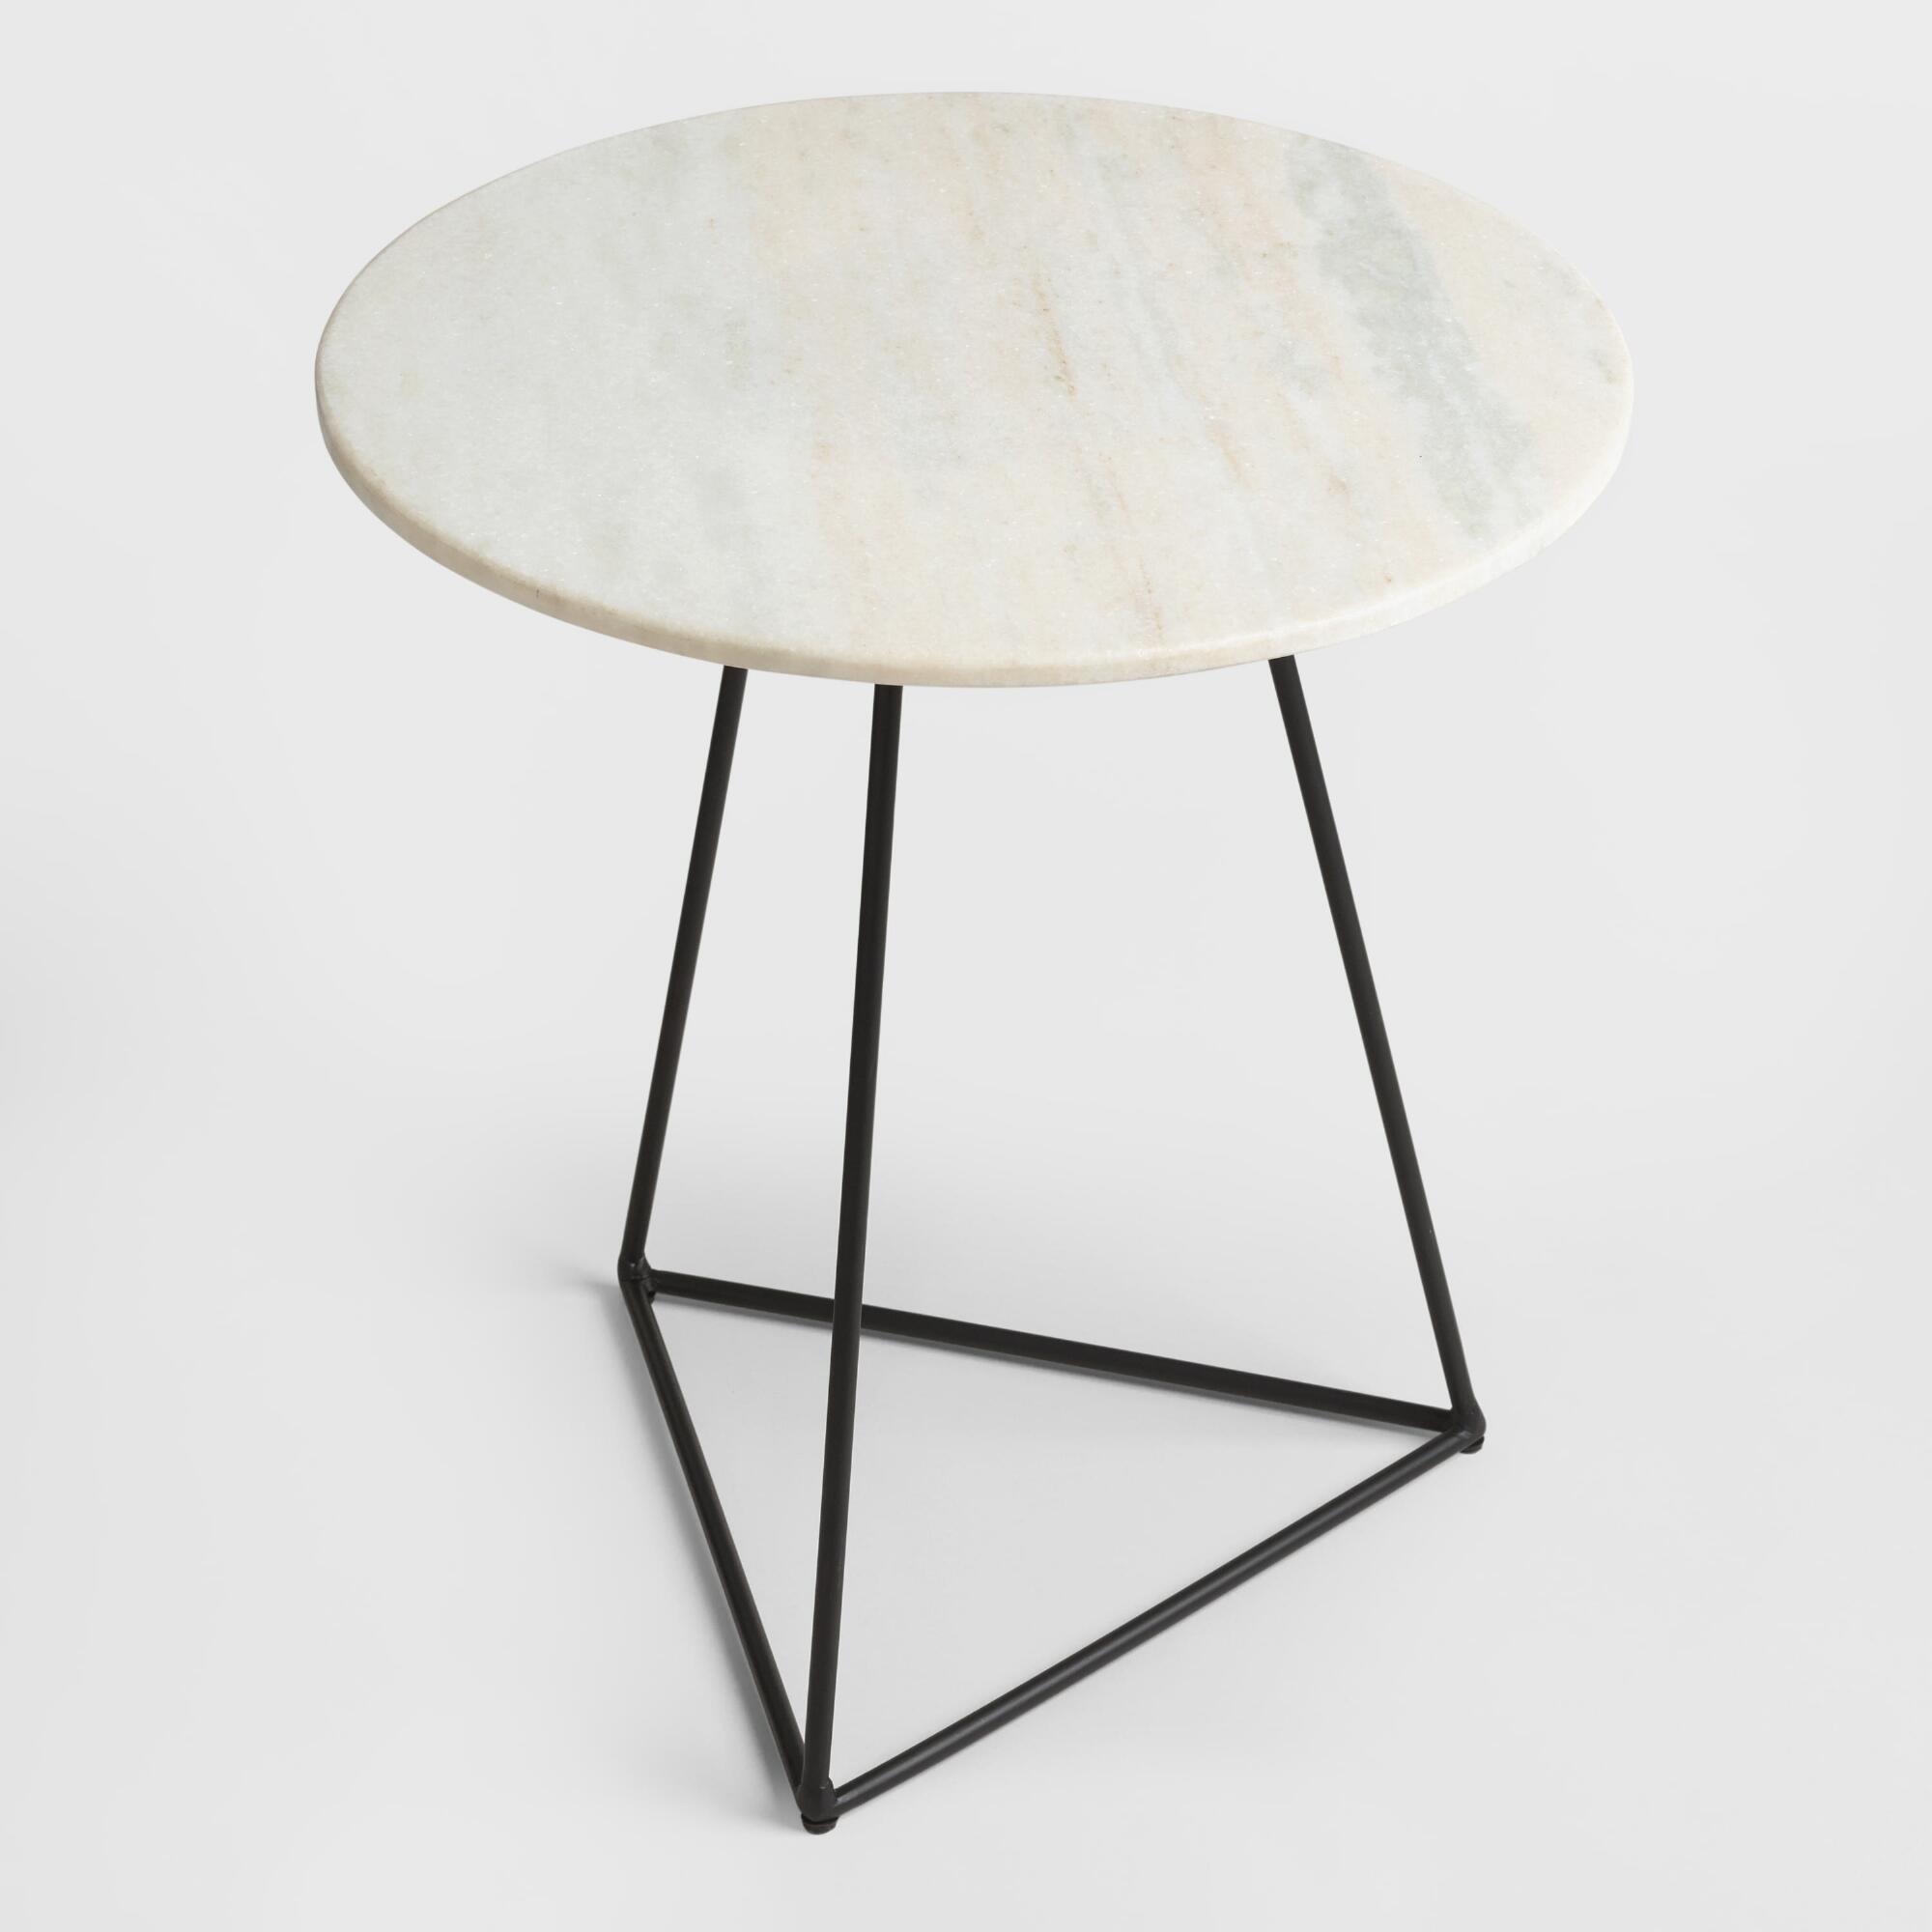 handcrafted skilled artisans our versatile side table gray round accent features natural marble top alabaster white with undertones and subtle gold patio serving outdoor covers